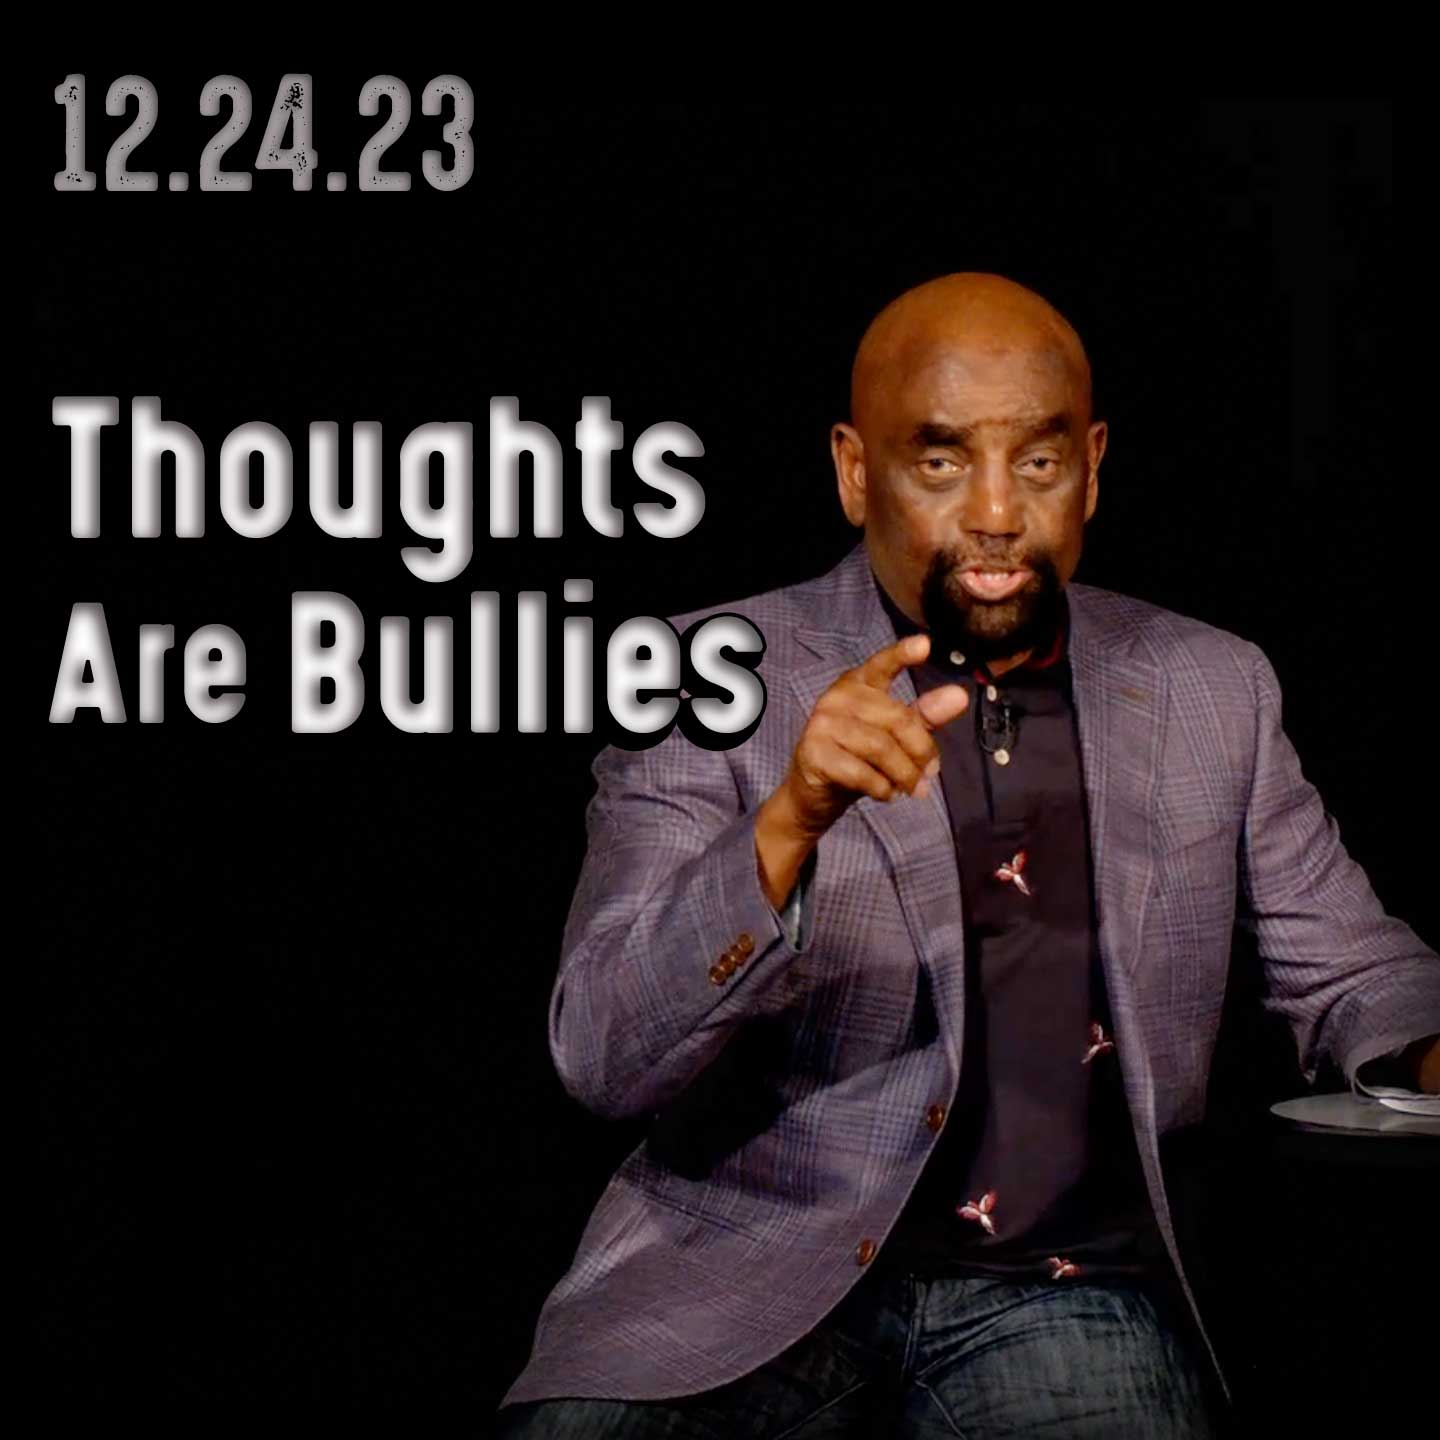 Why should we care what other people say or think about us? Church 12/24/23 Thoughts are bullies